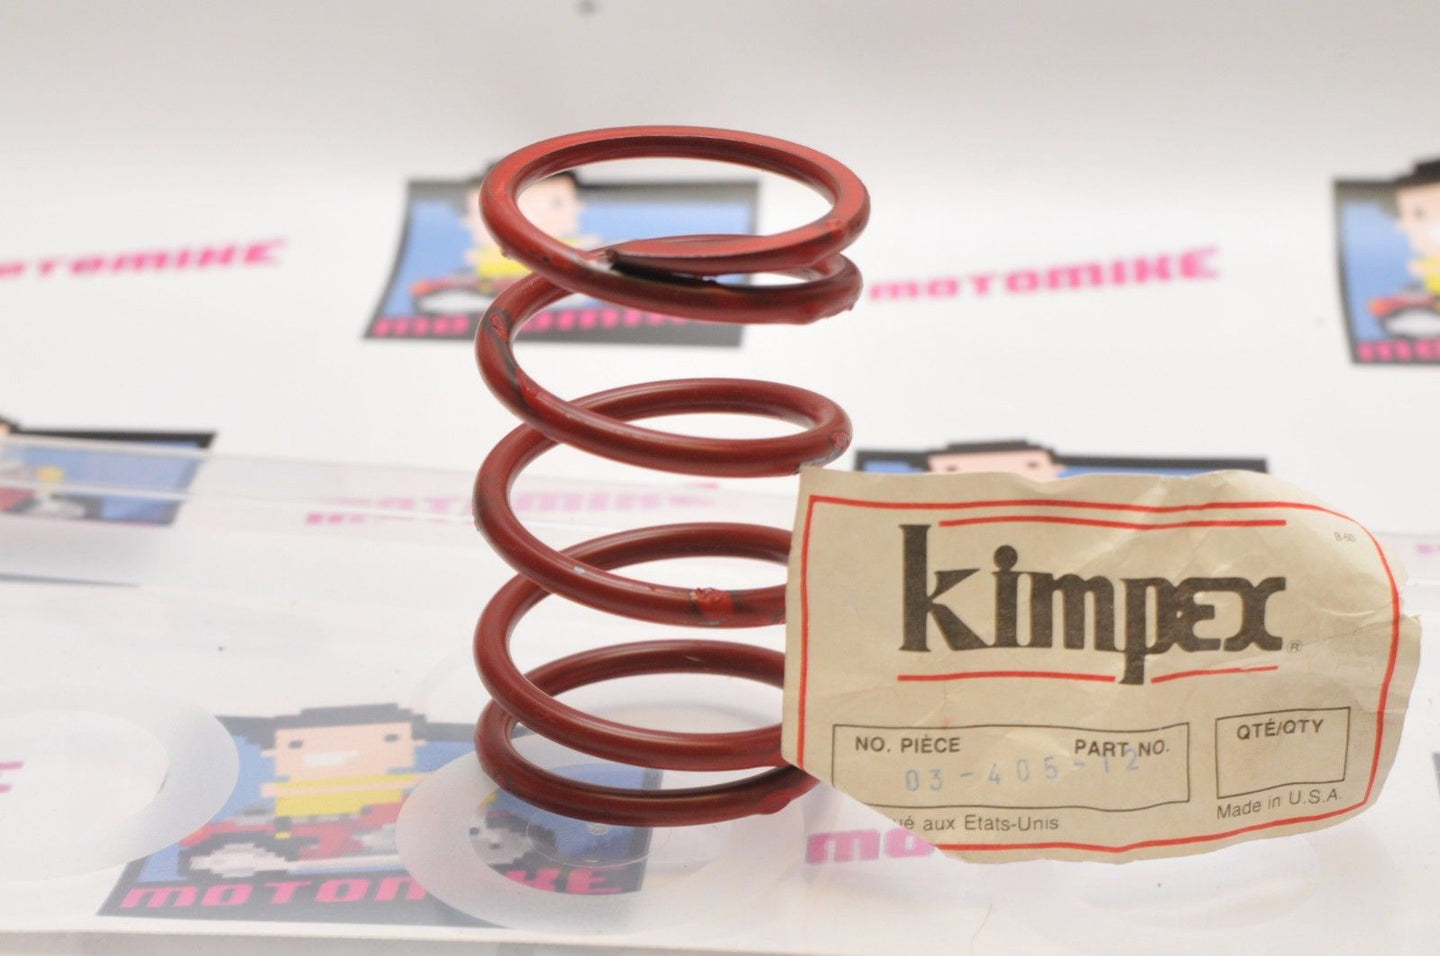 KIMPEX CLUTCH SPRING 03-405-12 RED - Motomike Canada